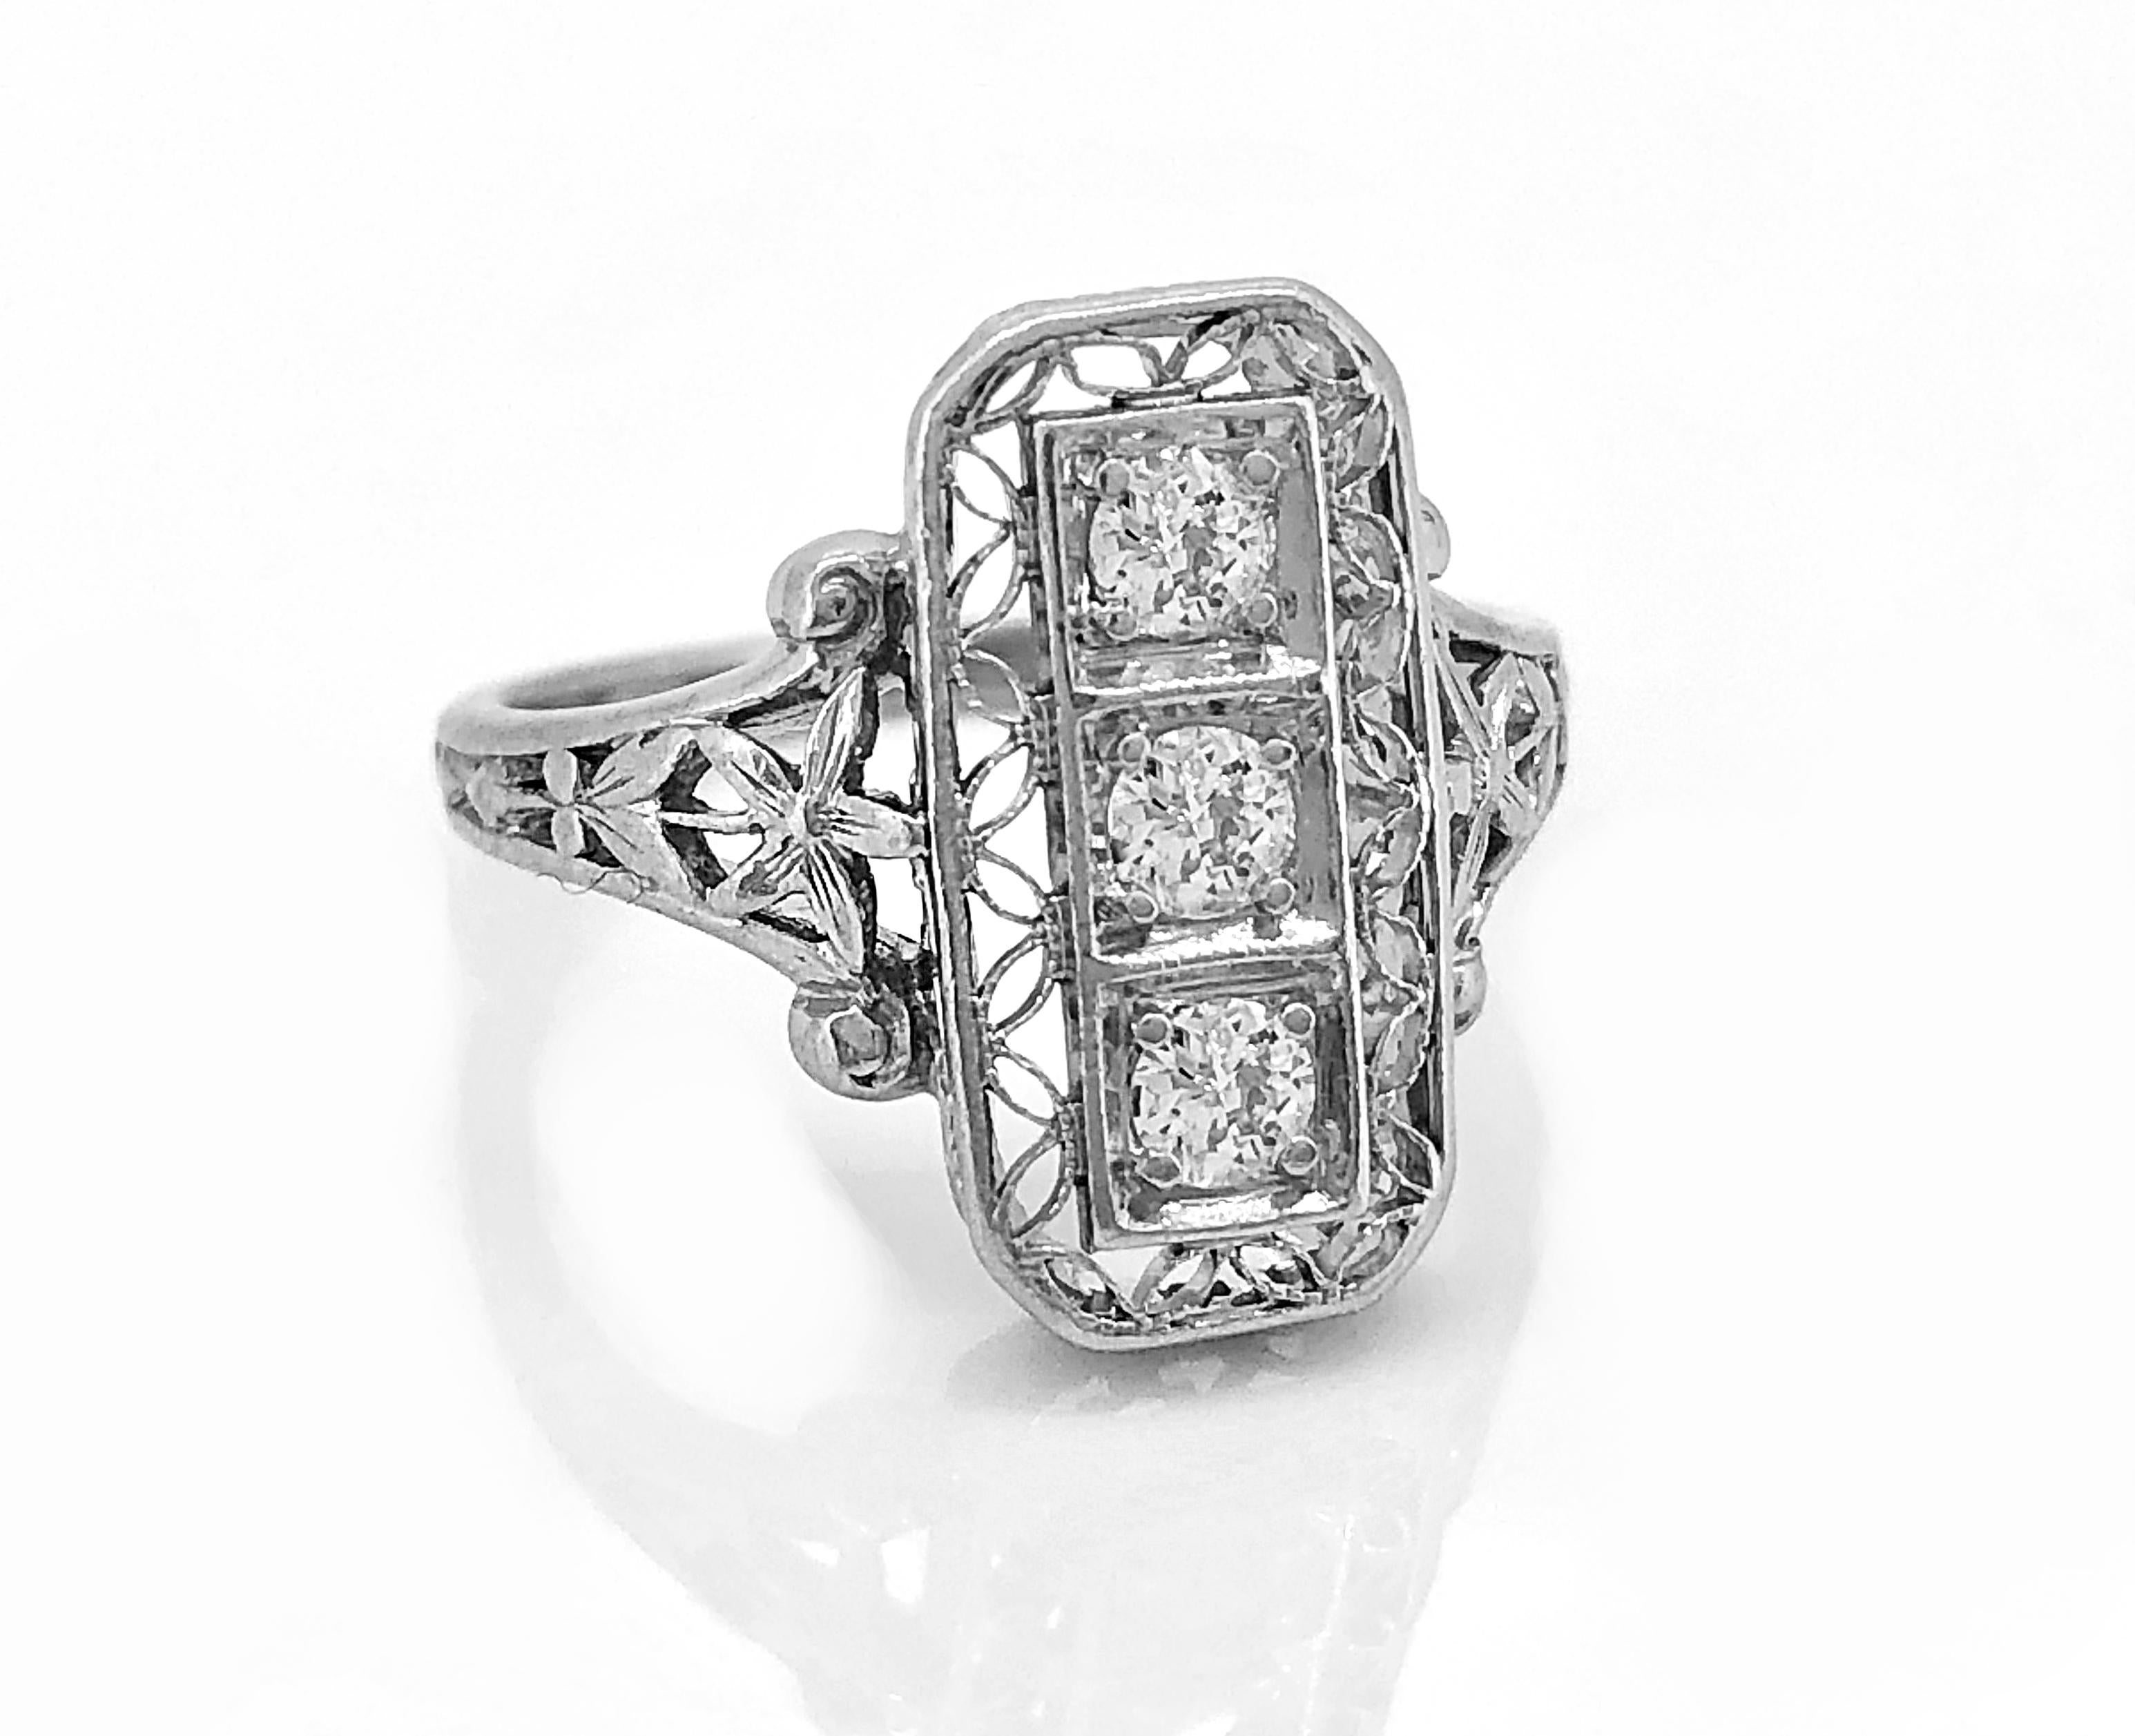 A delicately filigreed Edwardian antique fashion ring crafted in platinum that features 3 European cut diamonds that weight .20ct. apx. T.W. The head and gallery are artistically pierced and the shoulders are engraved with a flower at the top of the